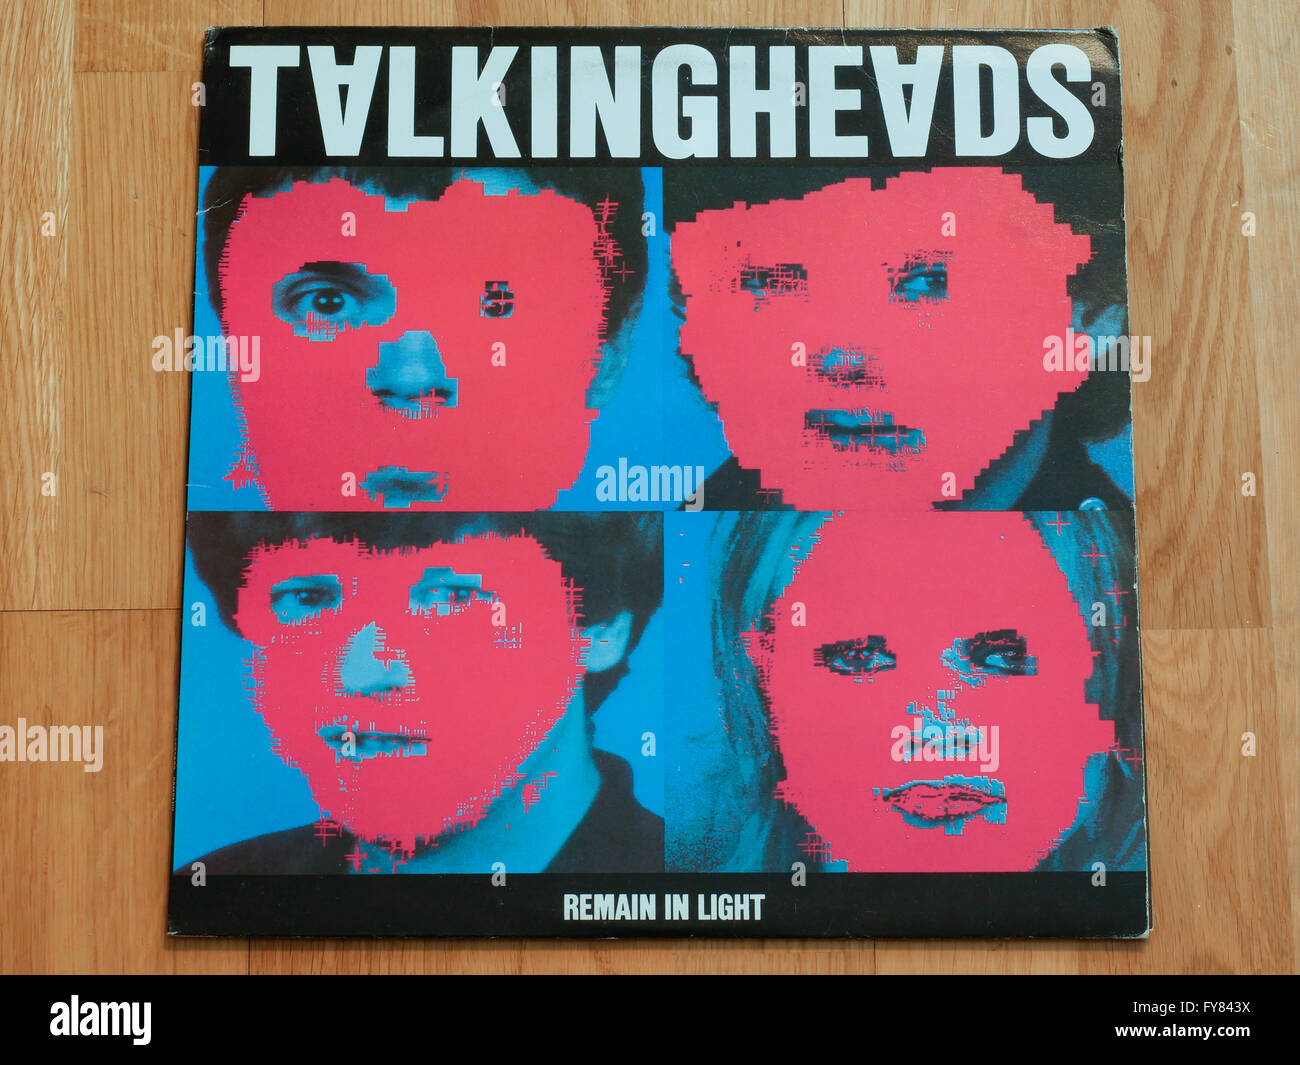 Talking heads LP cover on wooden floor Stock Photo